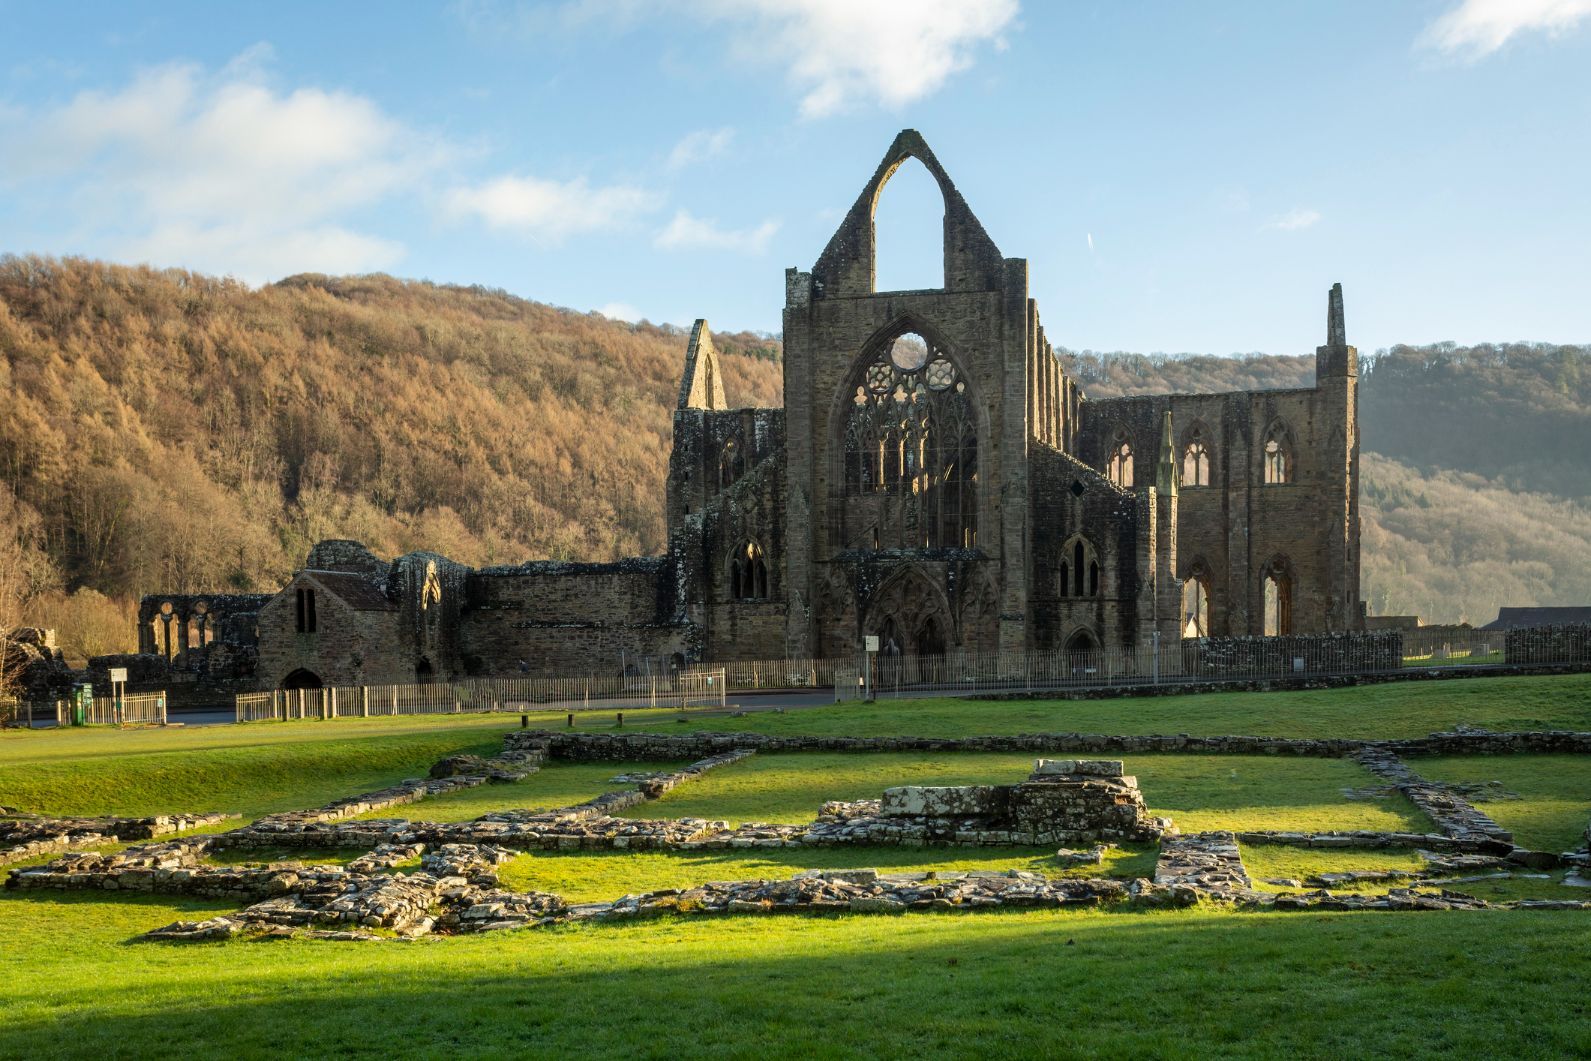 Tintern Abbey in Wales, with the forests behind.